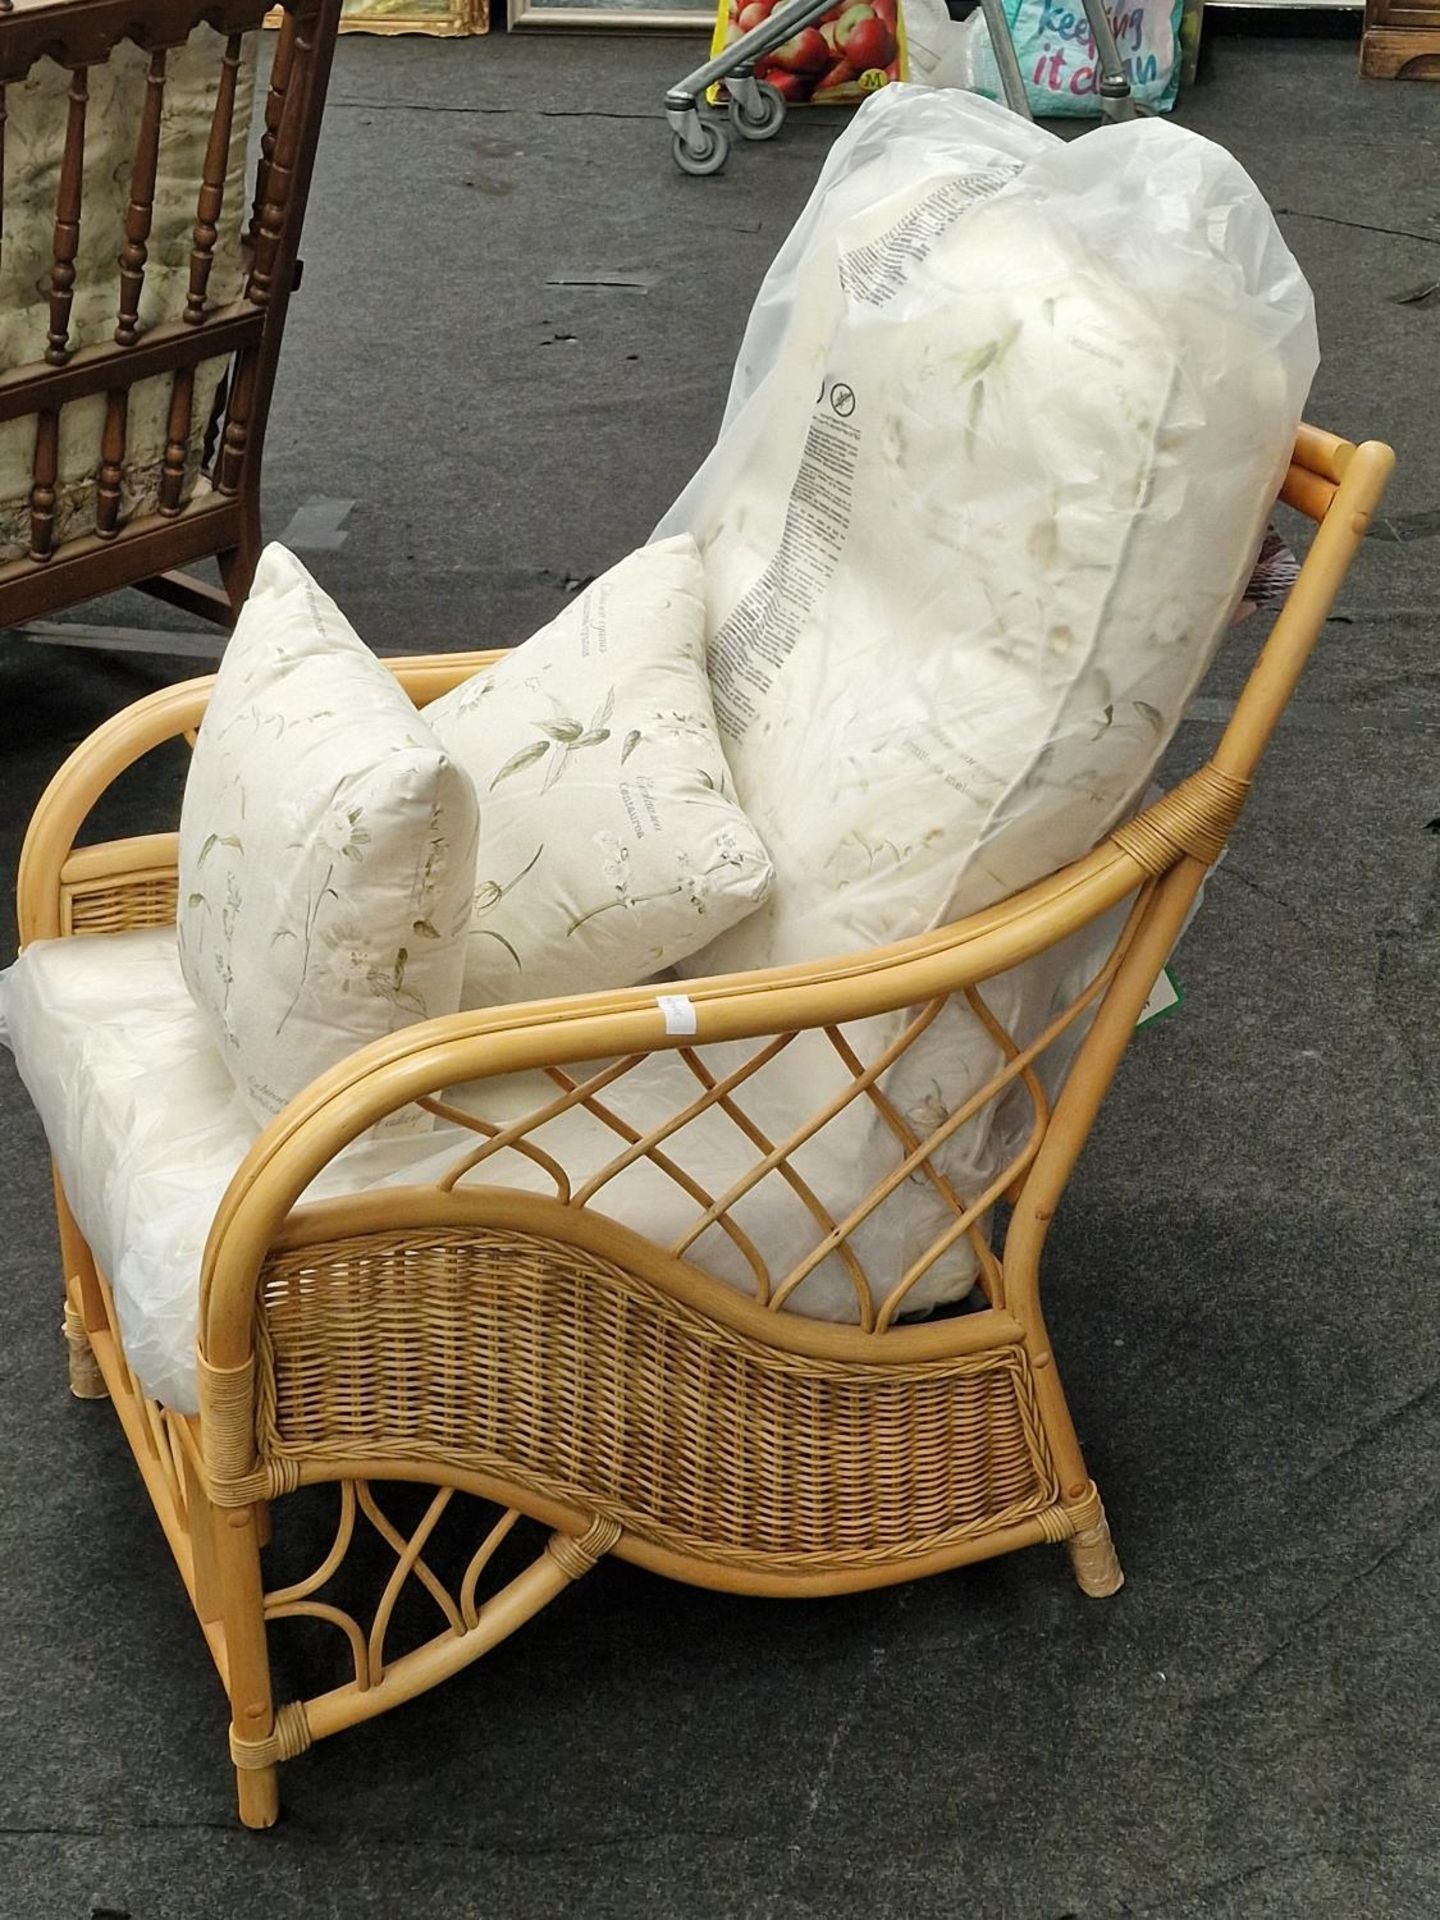 Cane conservatory chair with padded seating and two cushions to match 95x70x70cm - Image 2 of 2